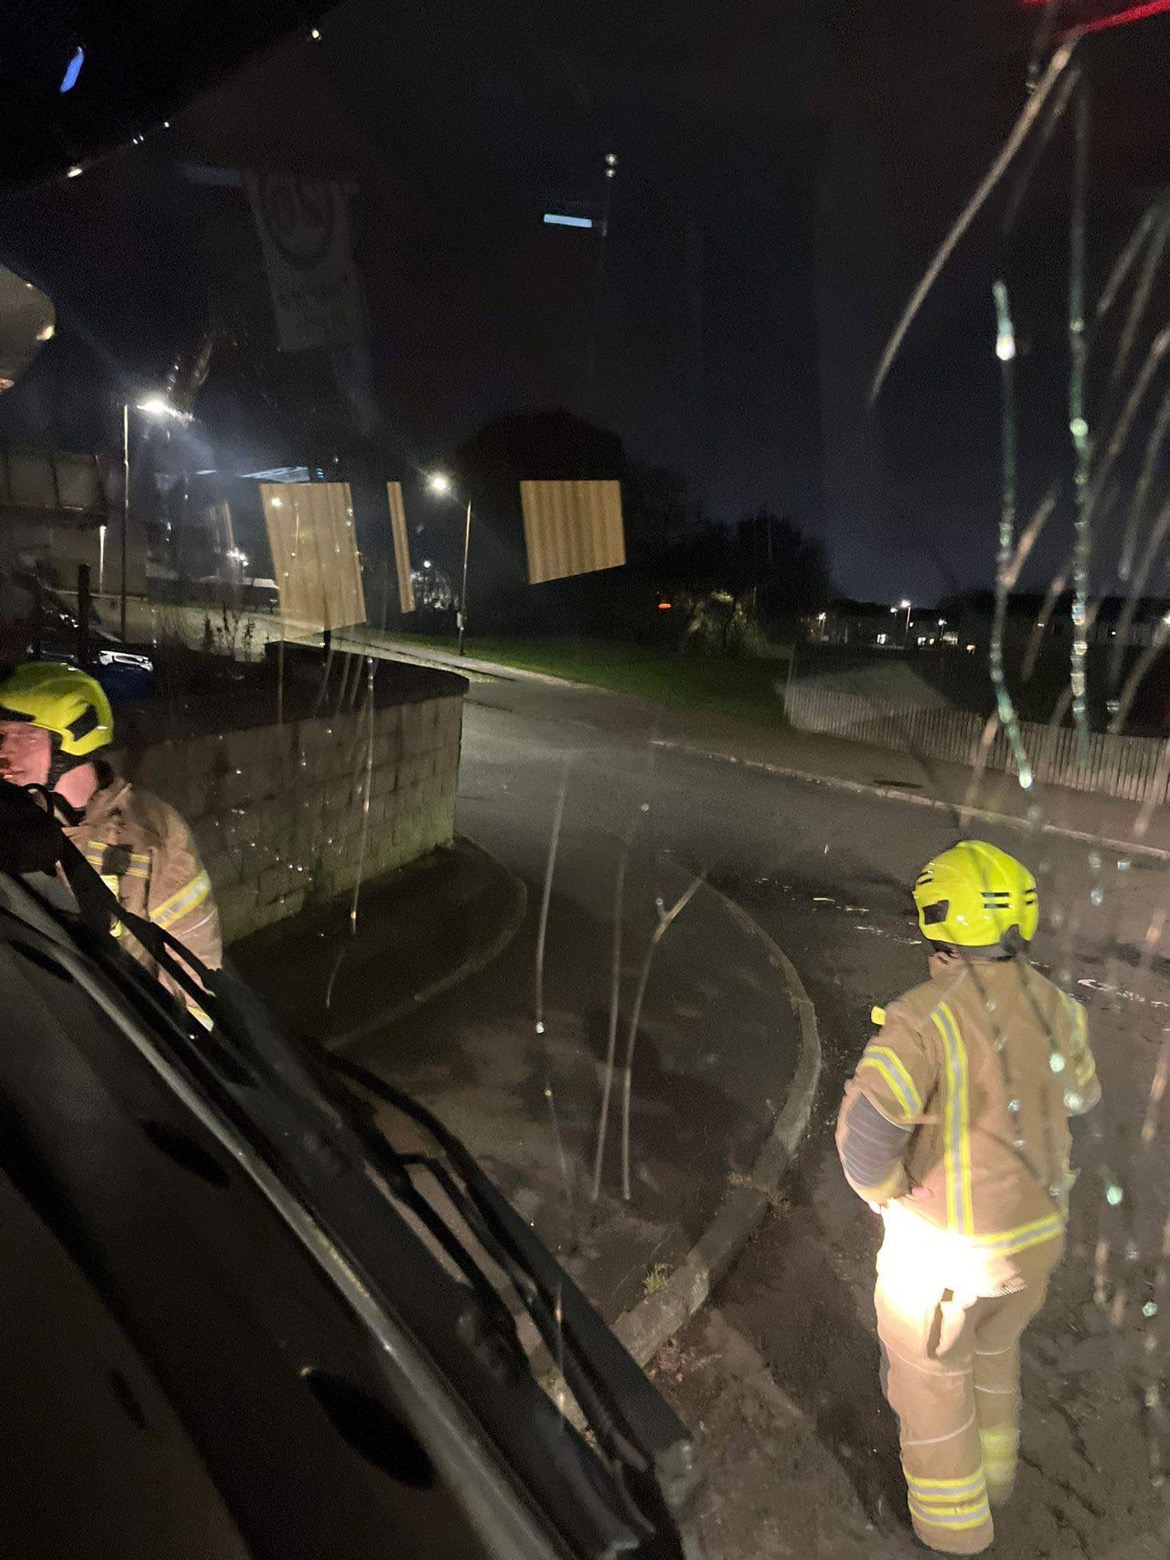 A brick smashed the window of a fire service appliance.